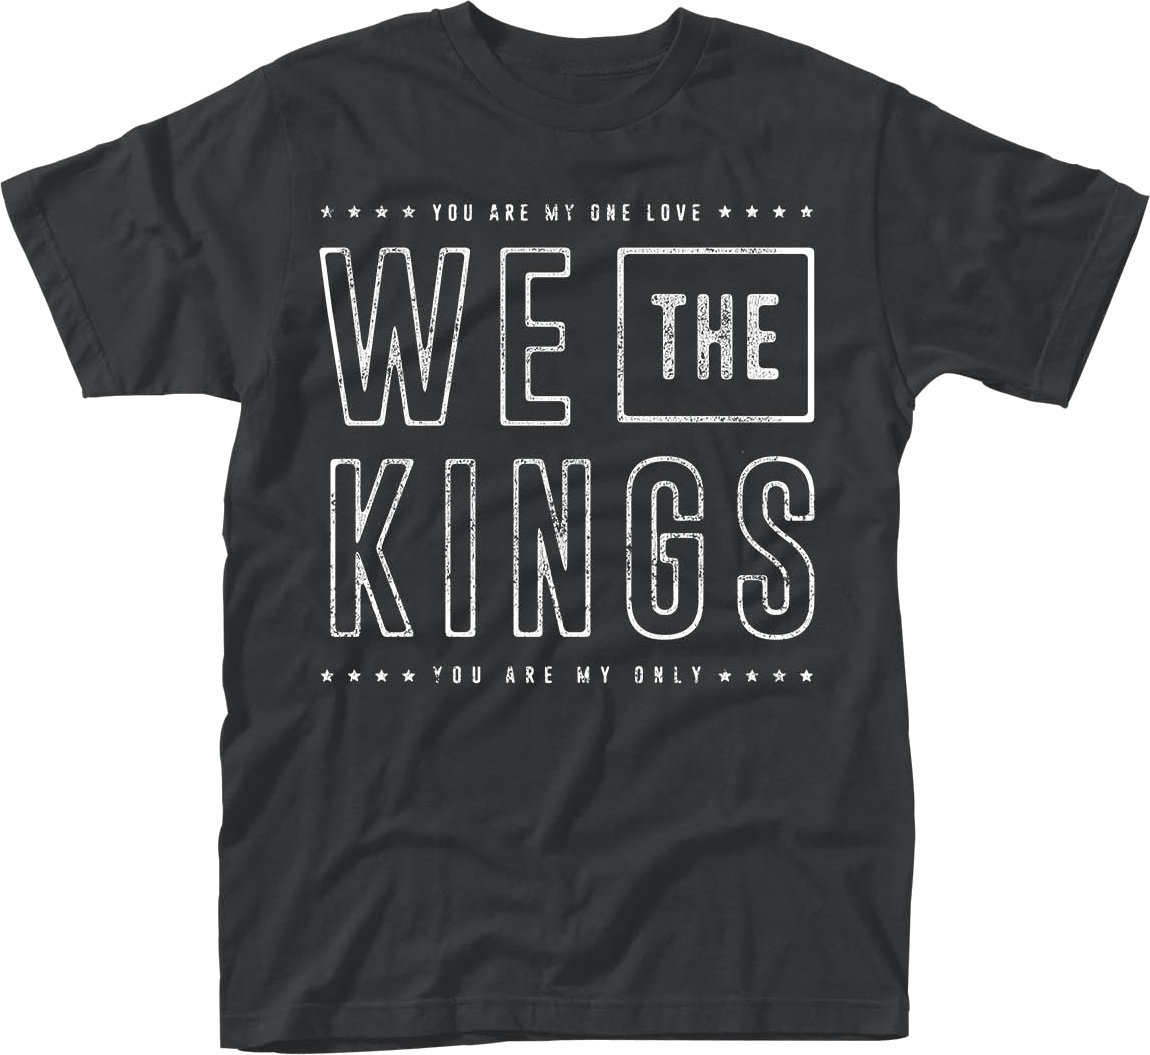 T-Shirt We The Kings T-Shirt You Are My Only Herren Schwarz M